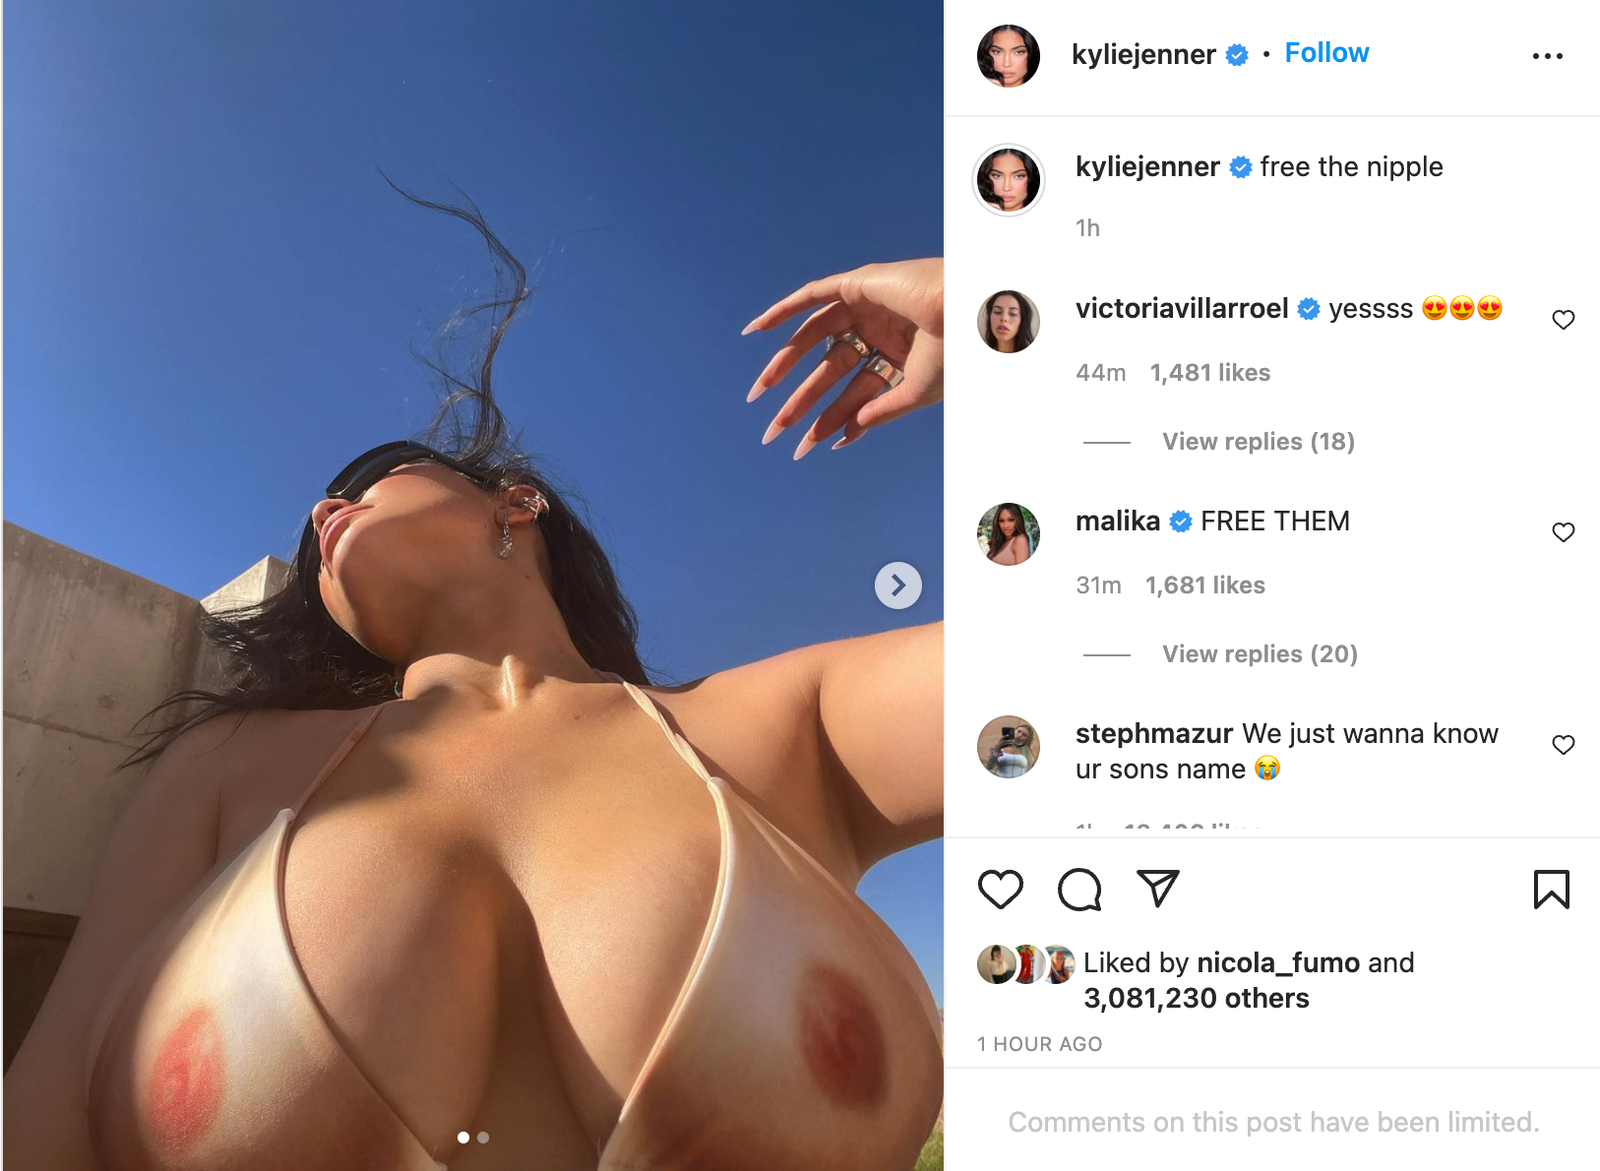 alan slaughter share free kylie jenner nude pics photos